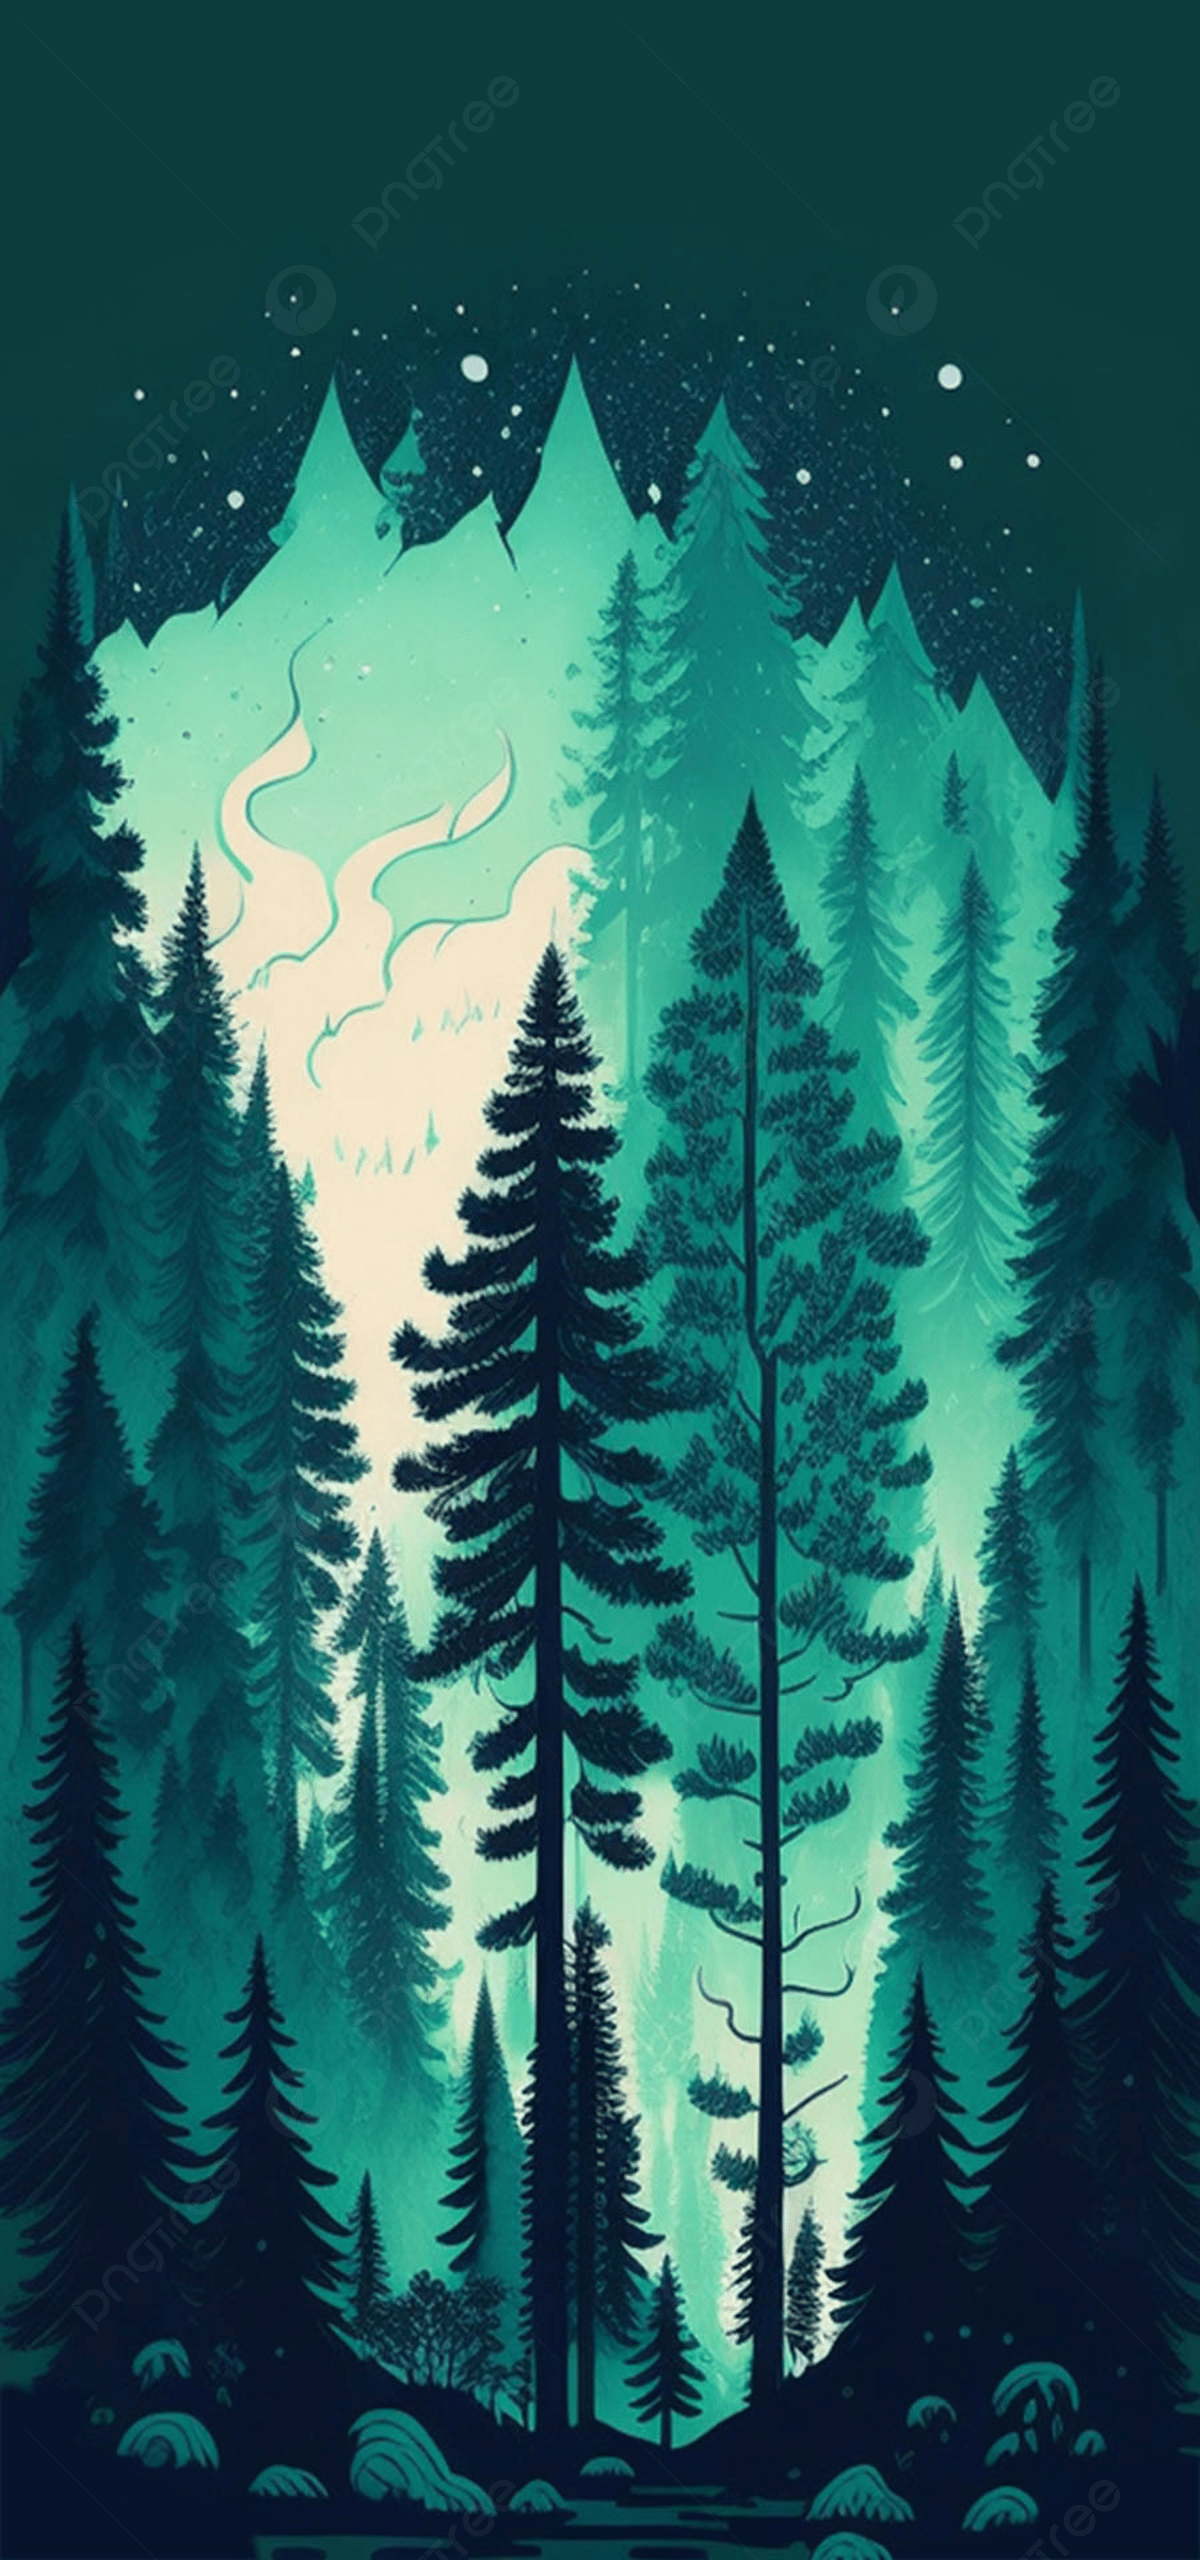 IPhone wallpaper of a forest at night with the northern lights - Camping